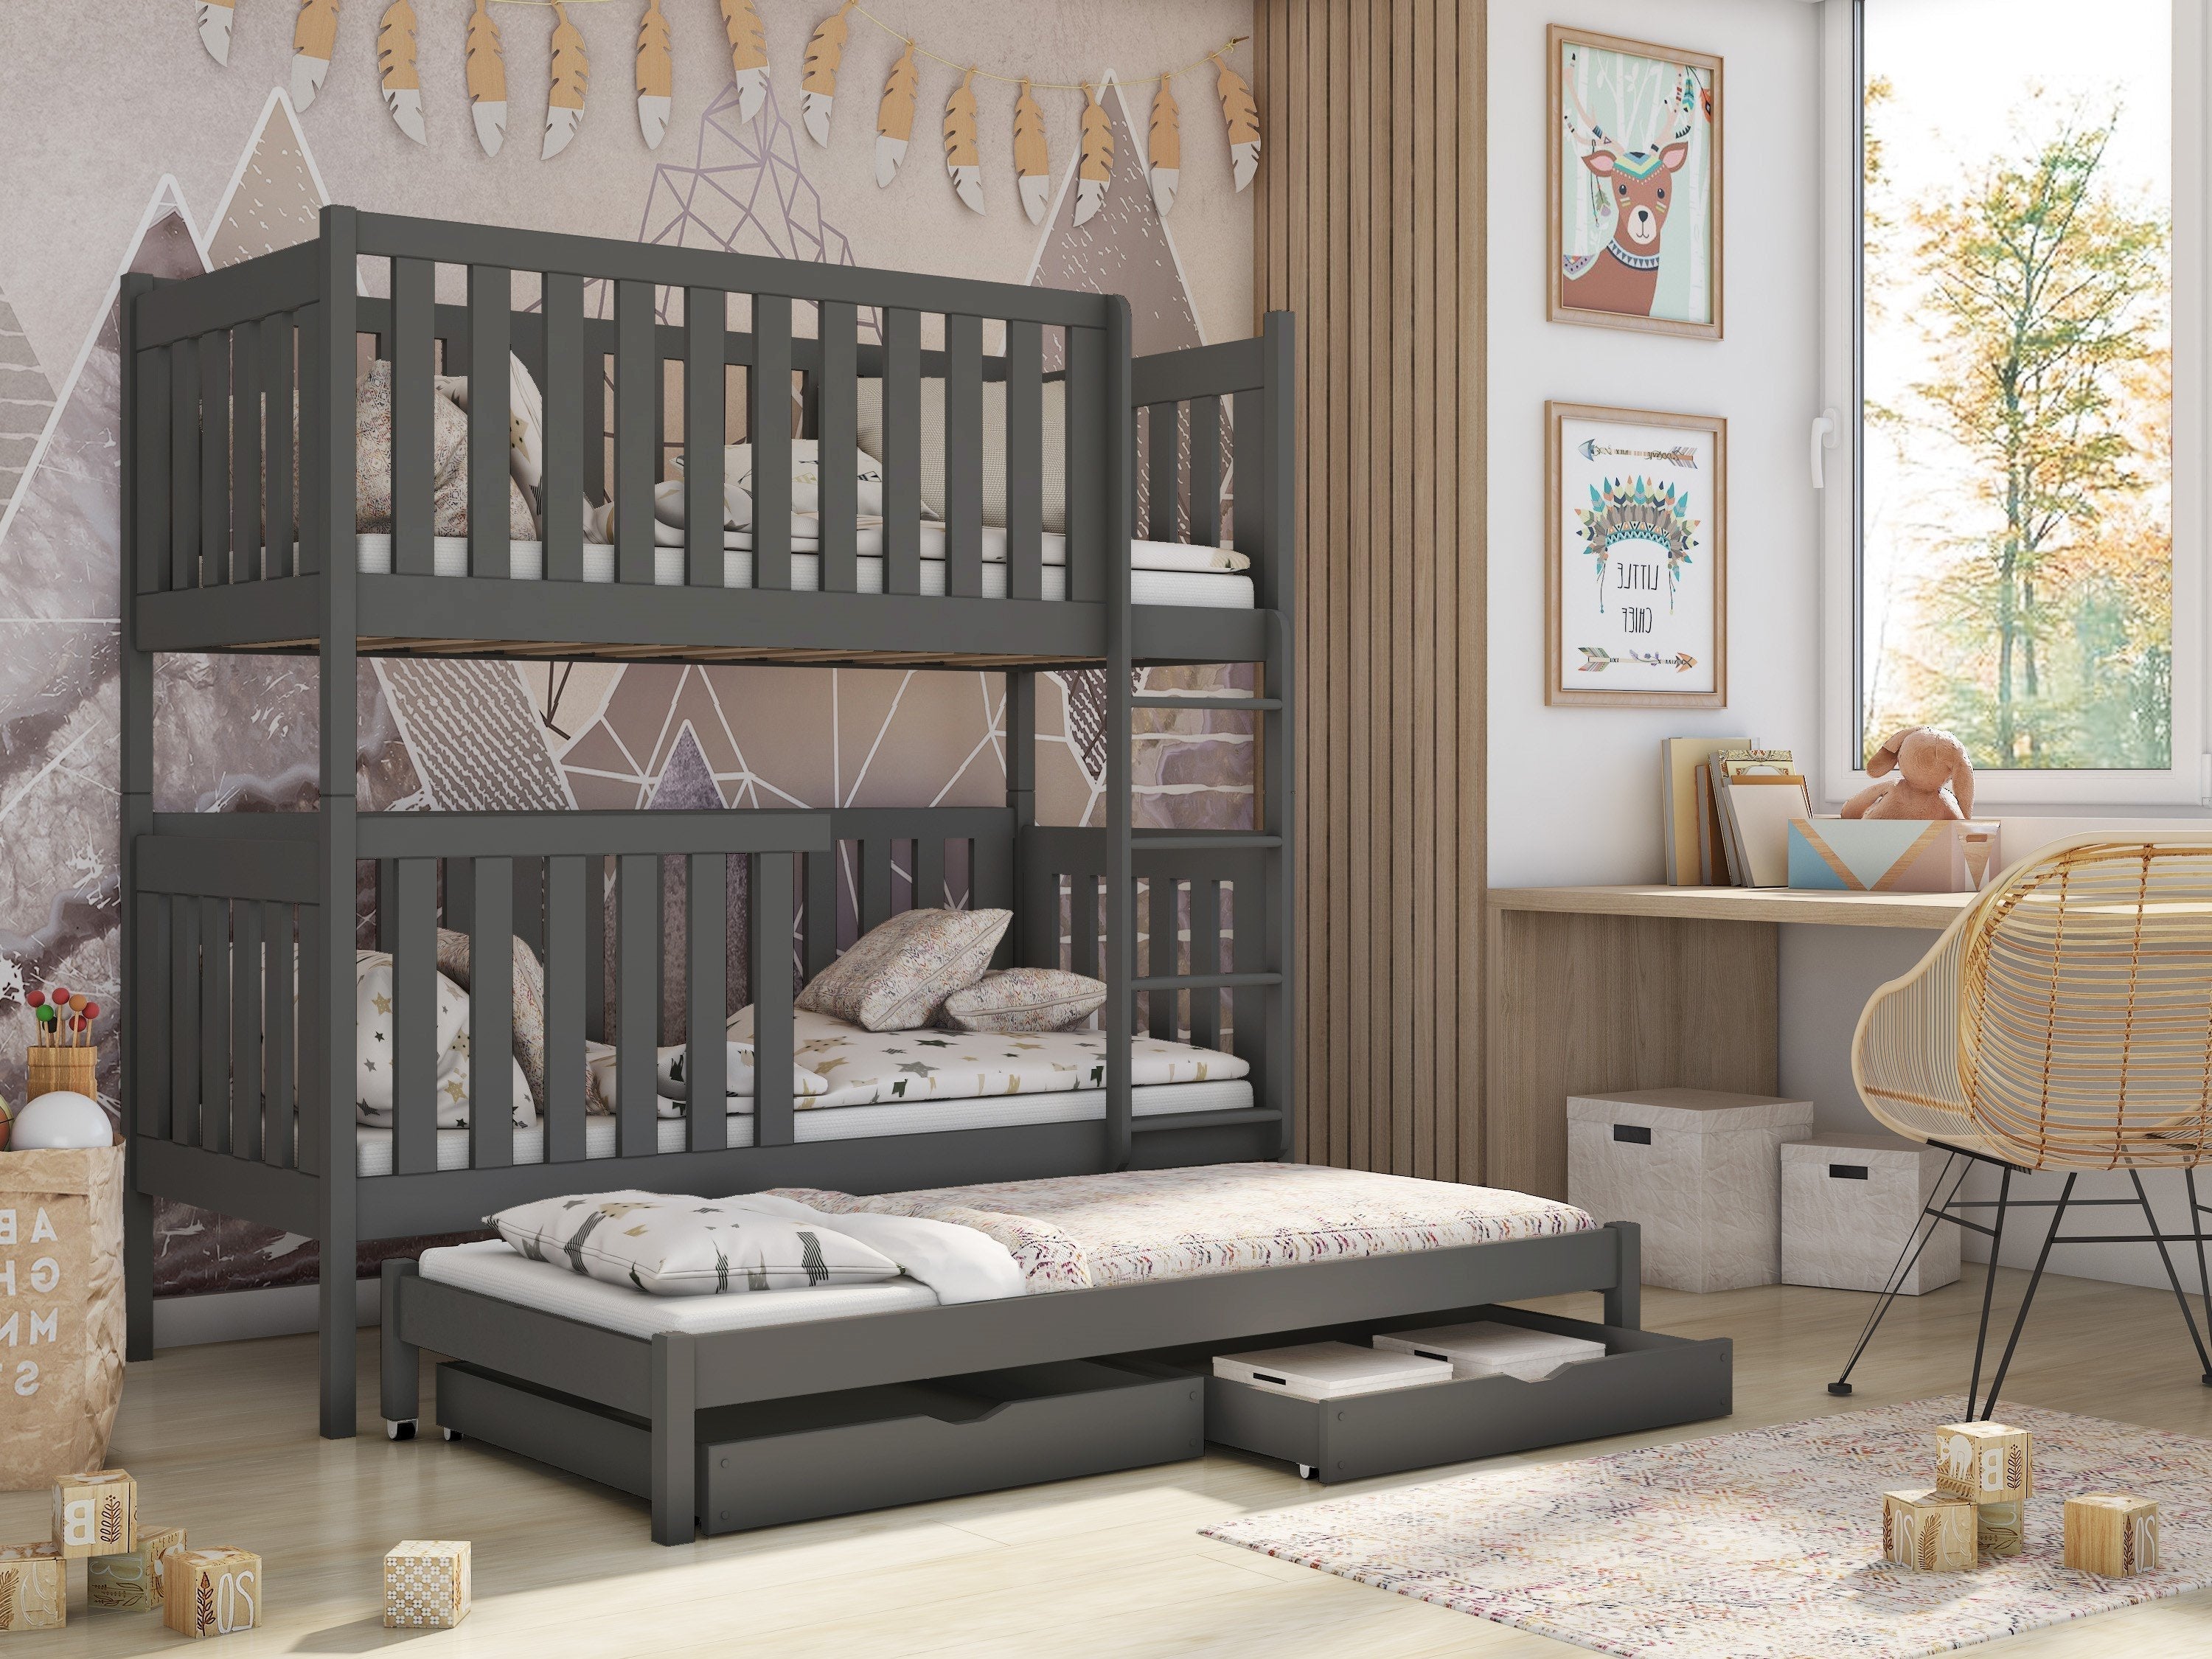 View Wooden Bunk Bed Emily with Trundle and Storage Graphite FoamBonnell Mattresses information